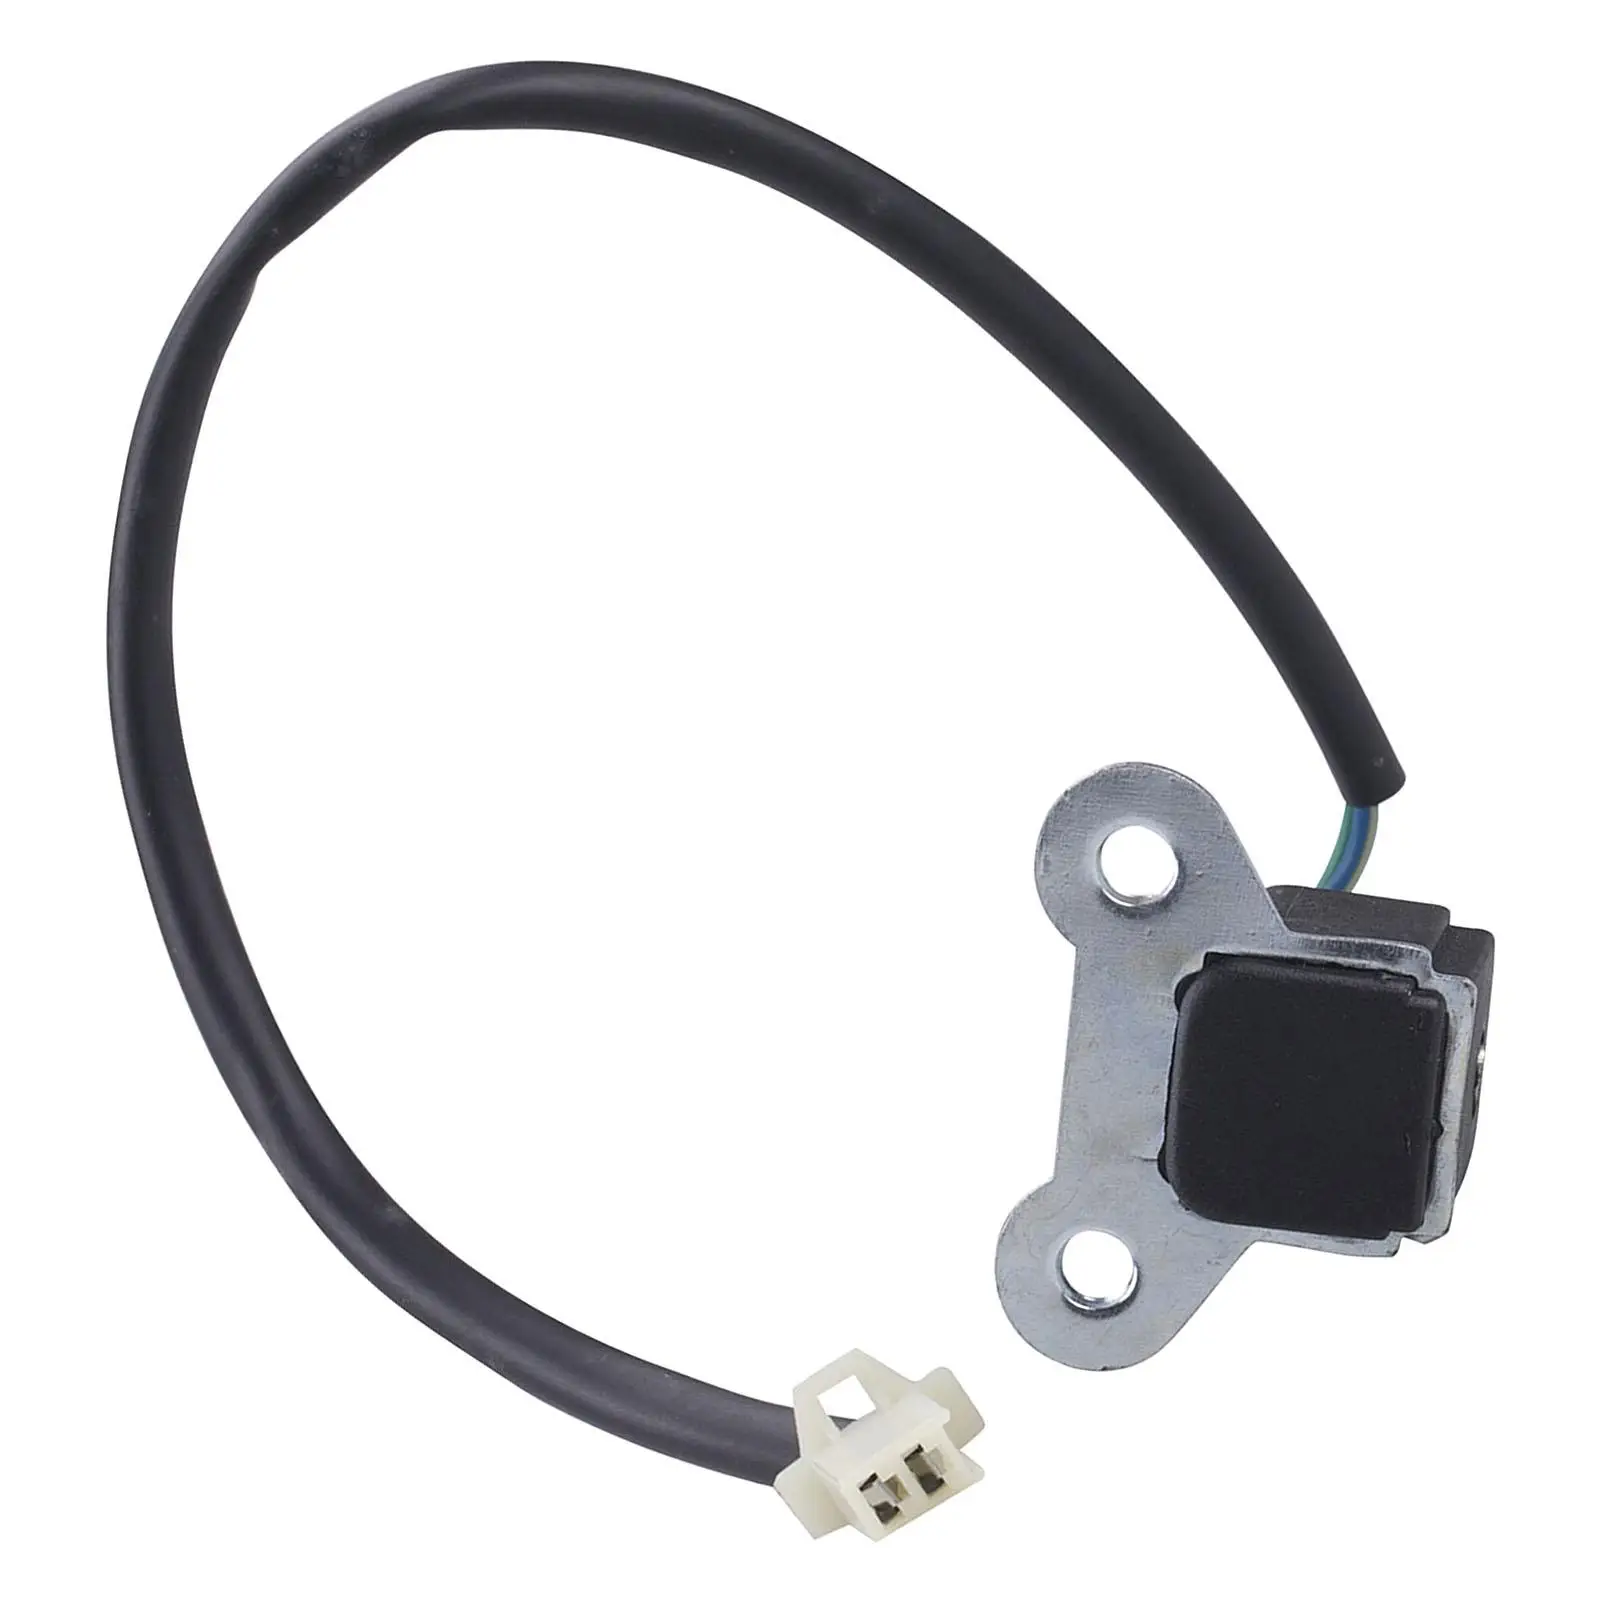 

Coil Stator Toggle Ignition Sensor, Water Cooled r Coil, for 0 Gy6 250cc Scooter, ATV, CF250 Moped CF125 150